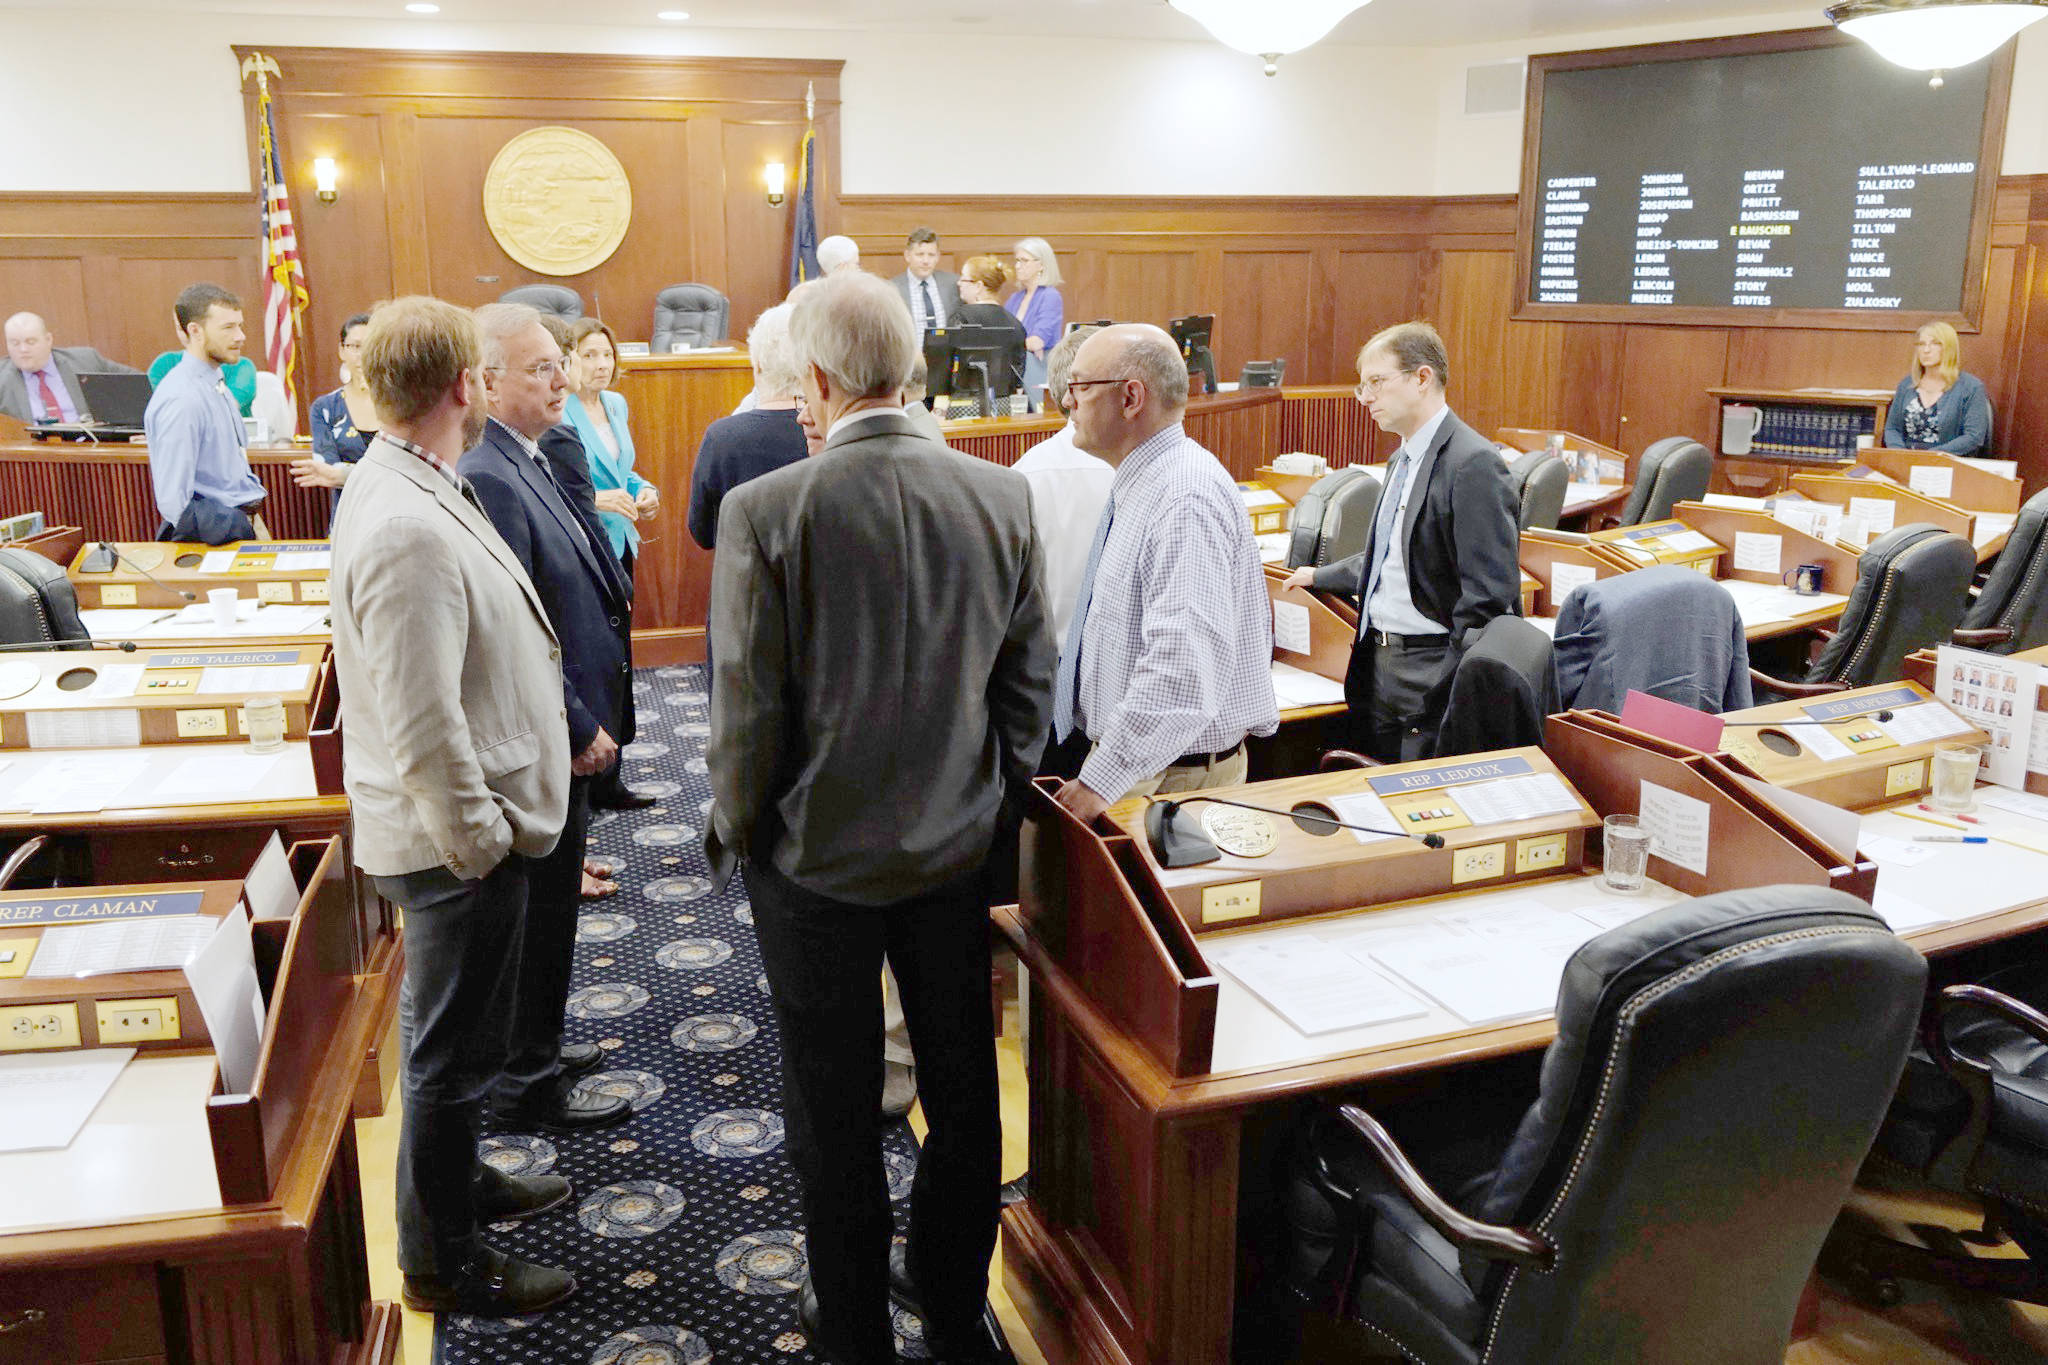 Michael Penn/The Juneau Empire                                Lawmakers talk among themselves during a break of a joint session of the Alaska Legislature on Thursday in Juneau.